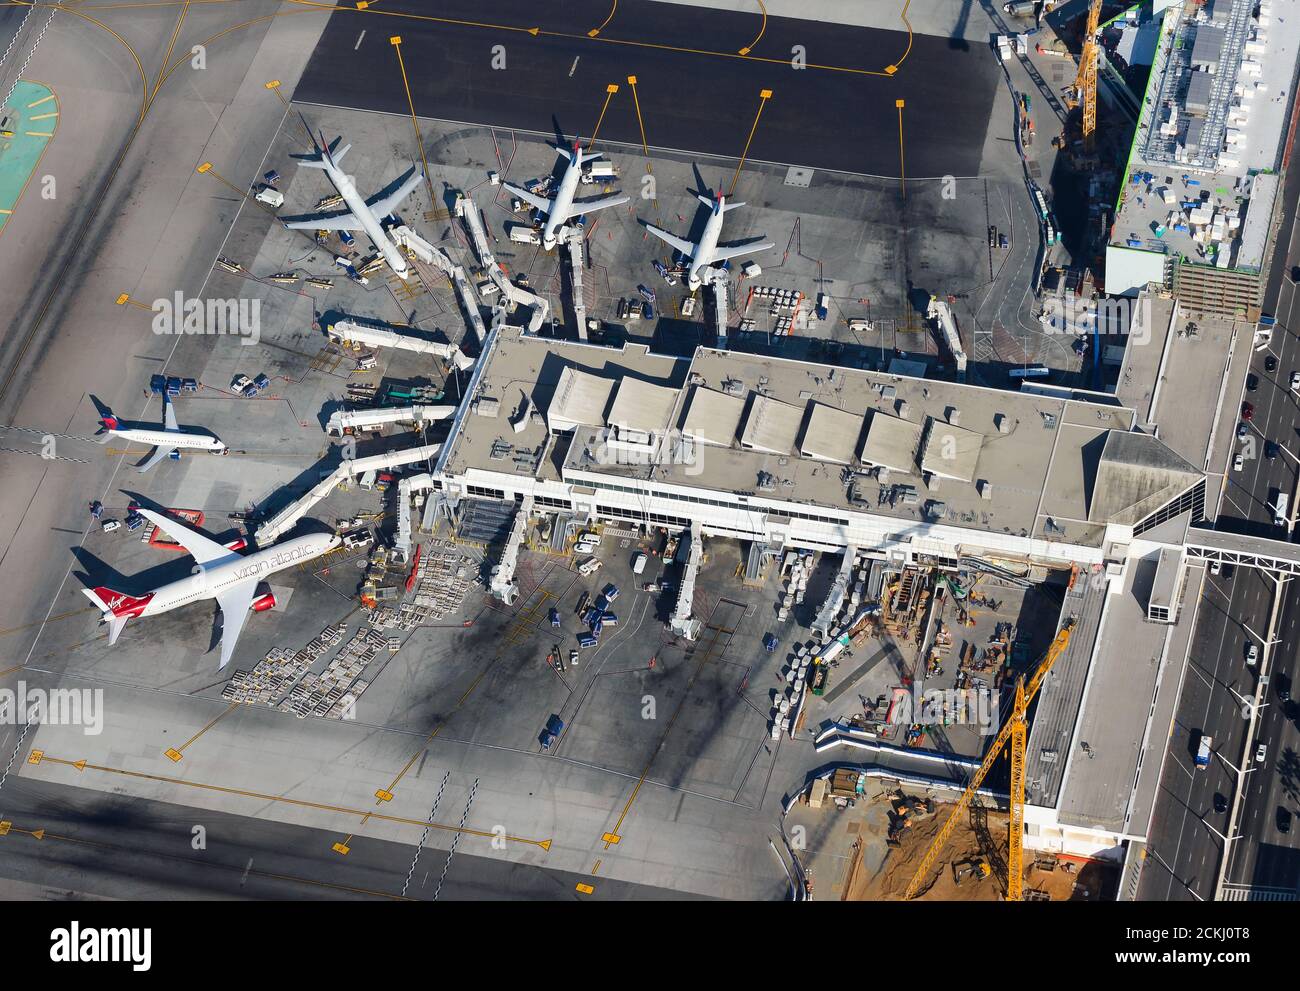 Los Angeles International Airport Terminal 2 used by Delta Airlines and Virgin Atlantic. Aerial view of Terminal 2 in LAX Airport. Stock Photo